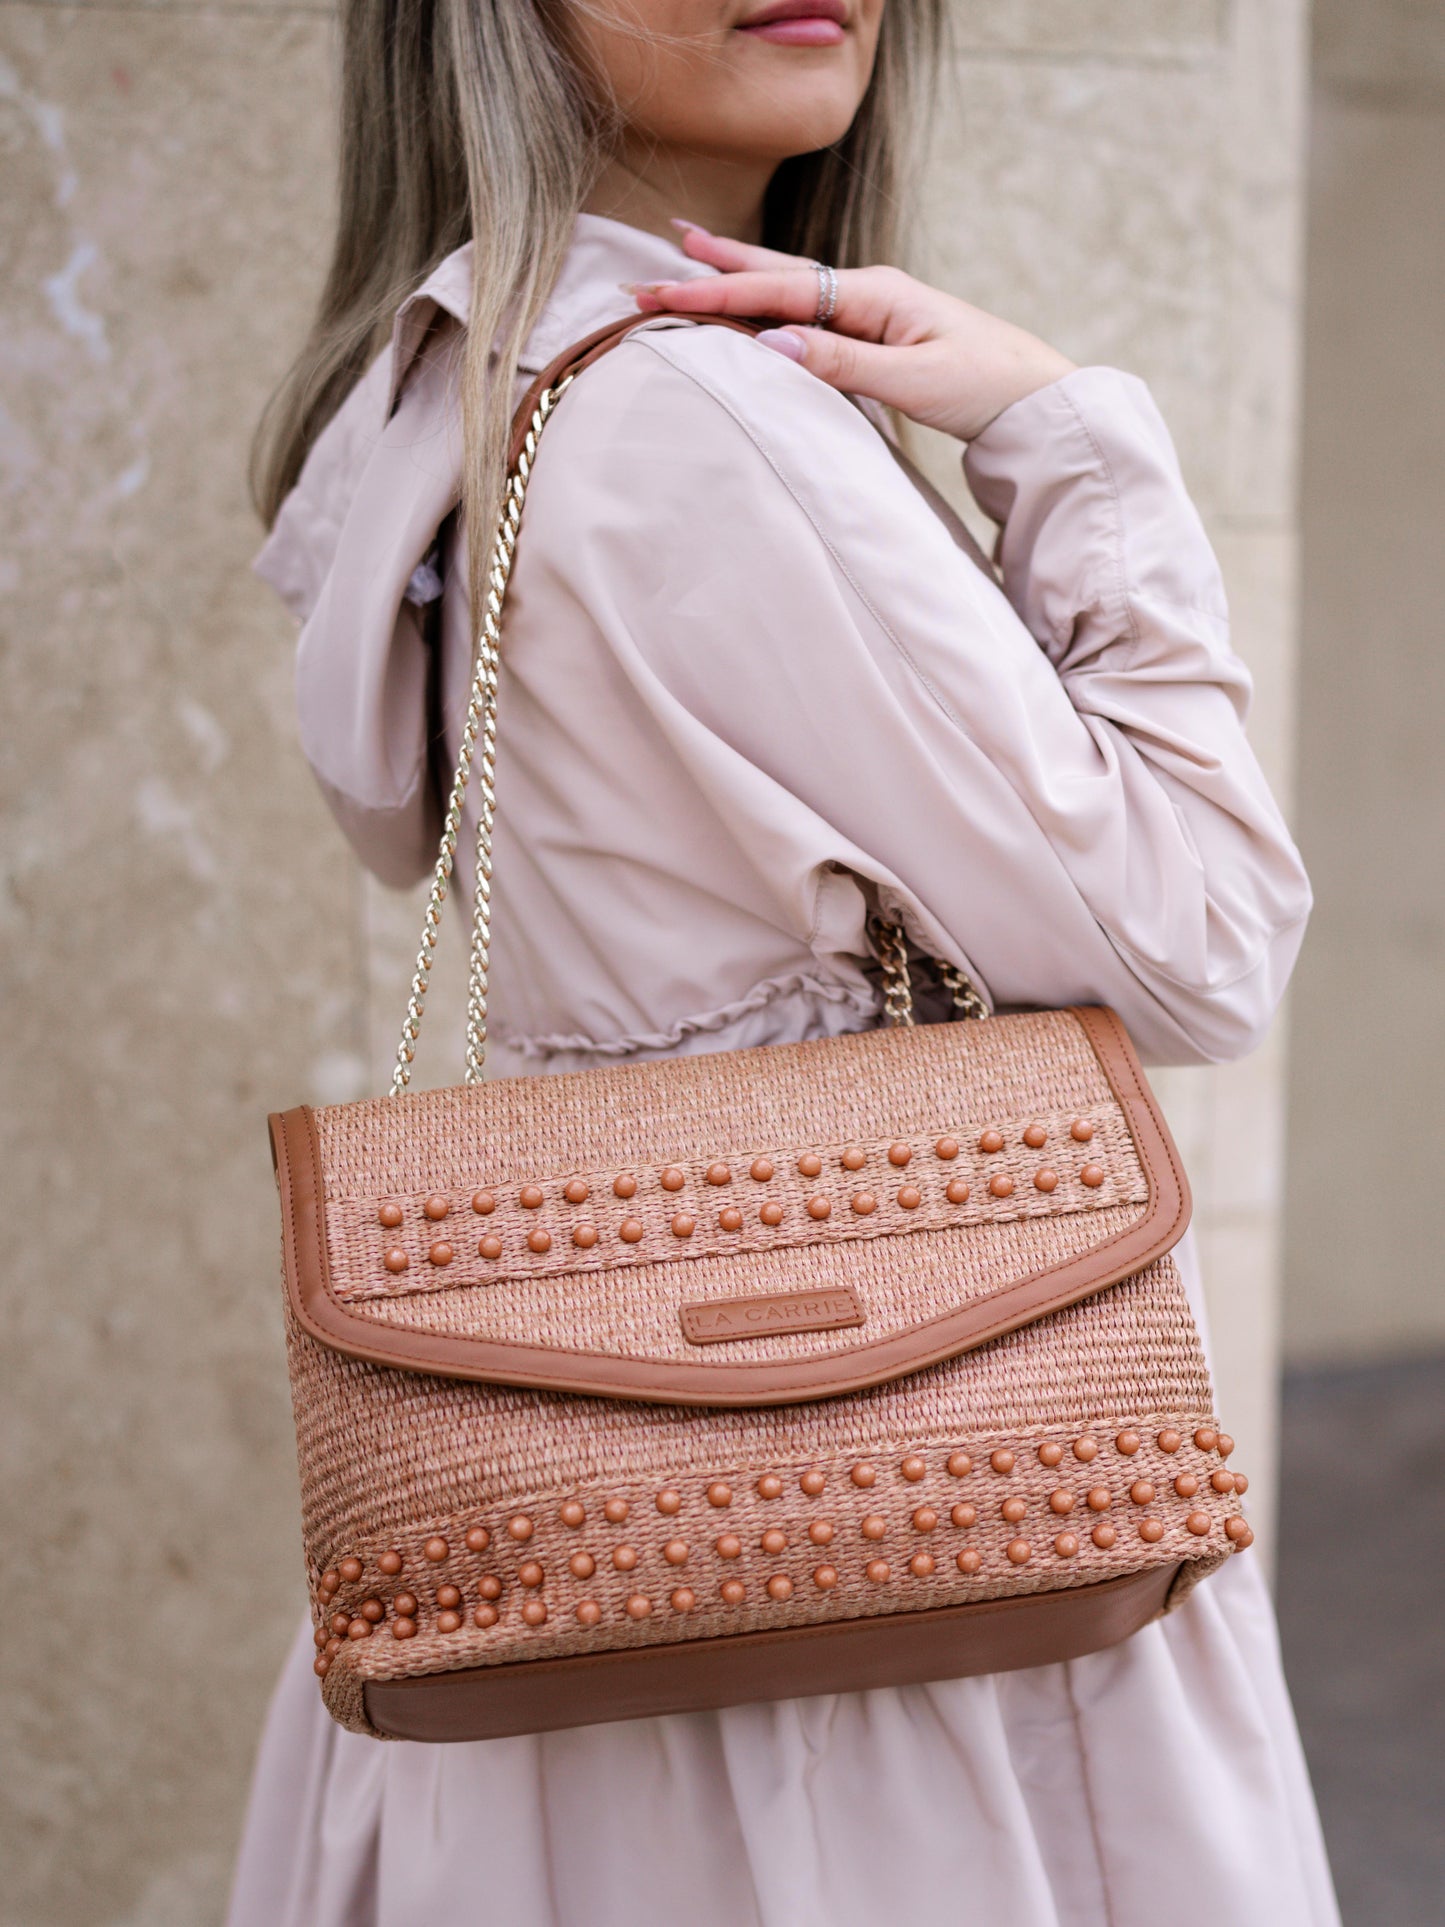 Brown handbag with a double strap